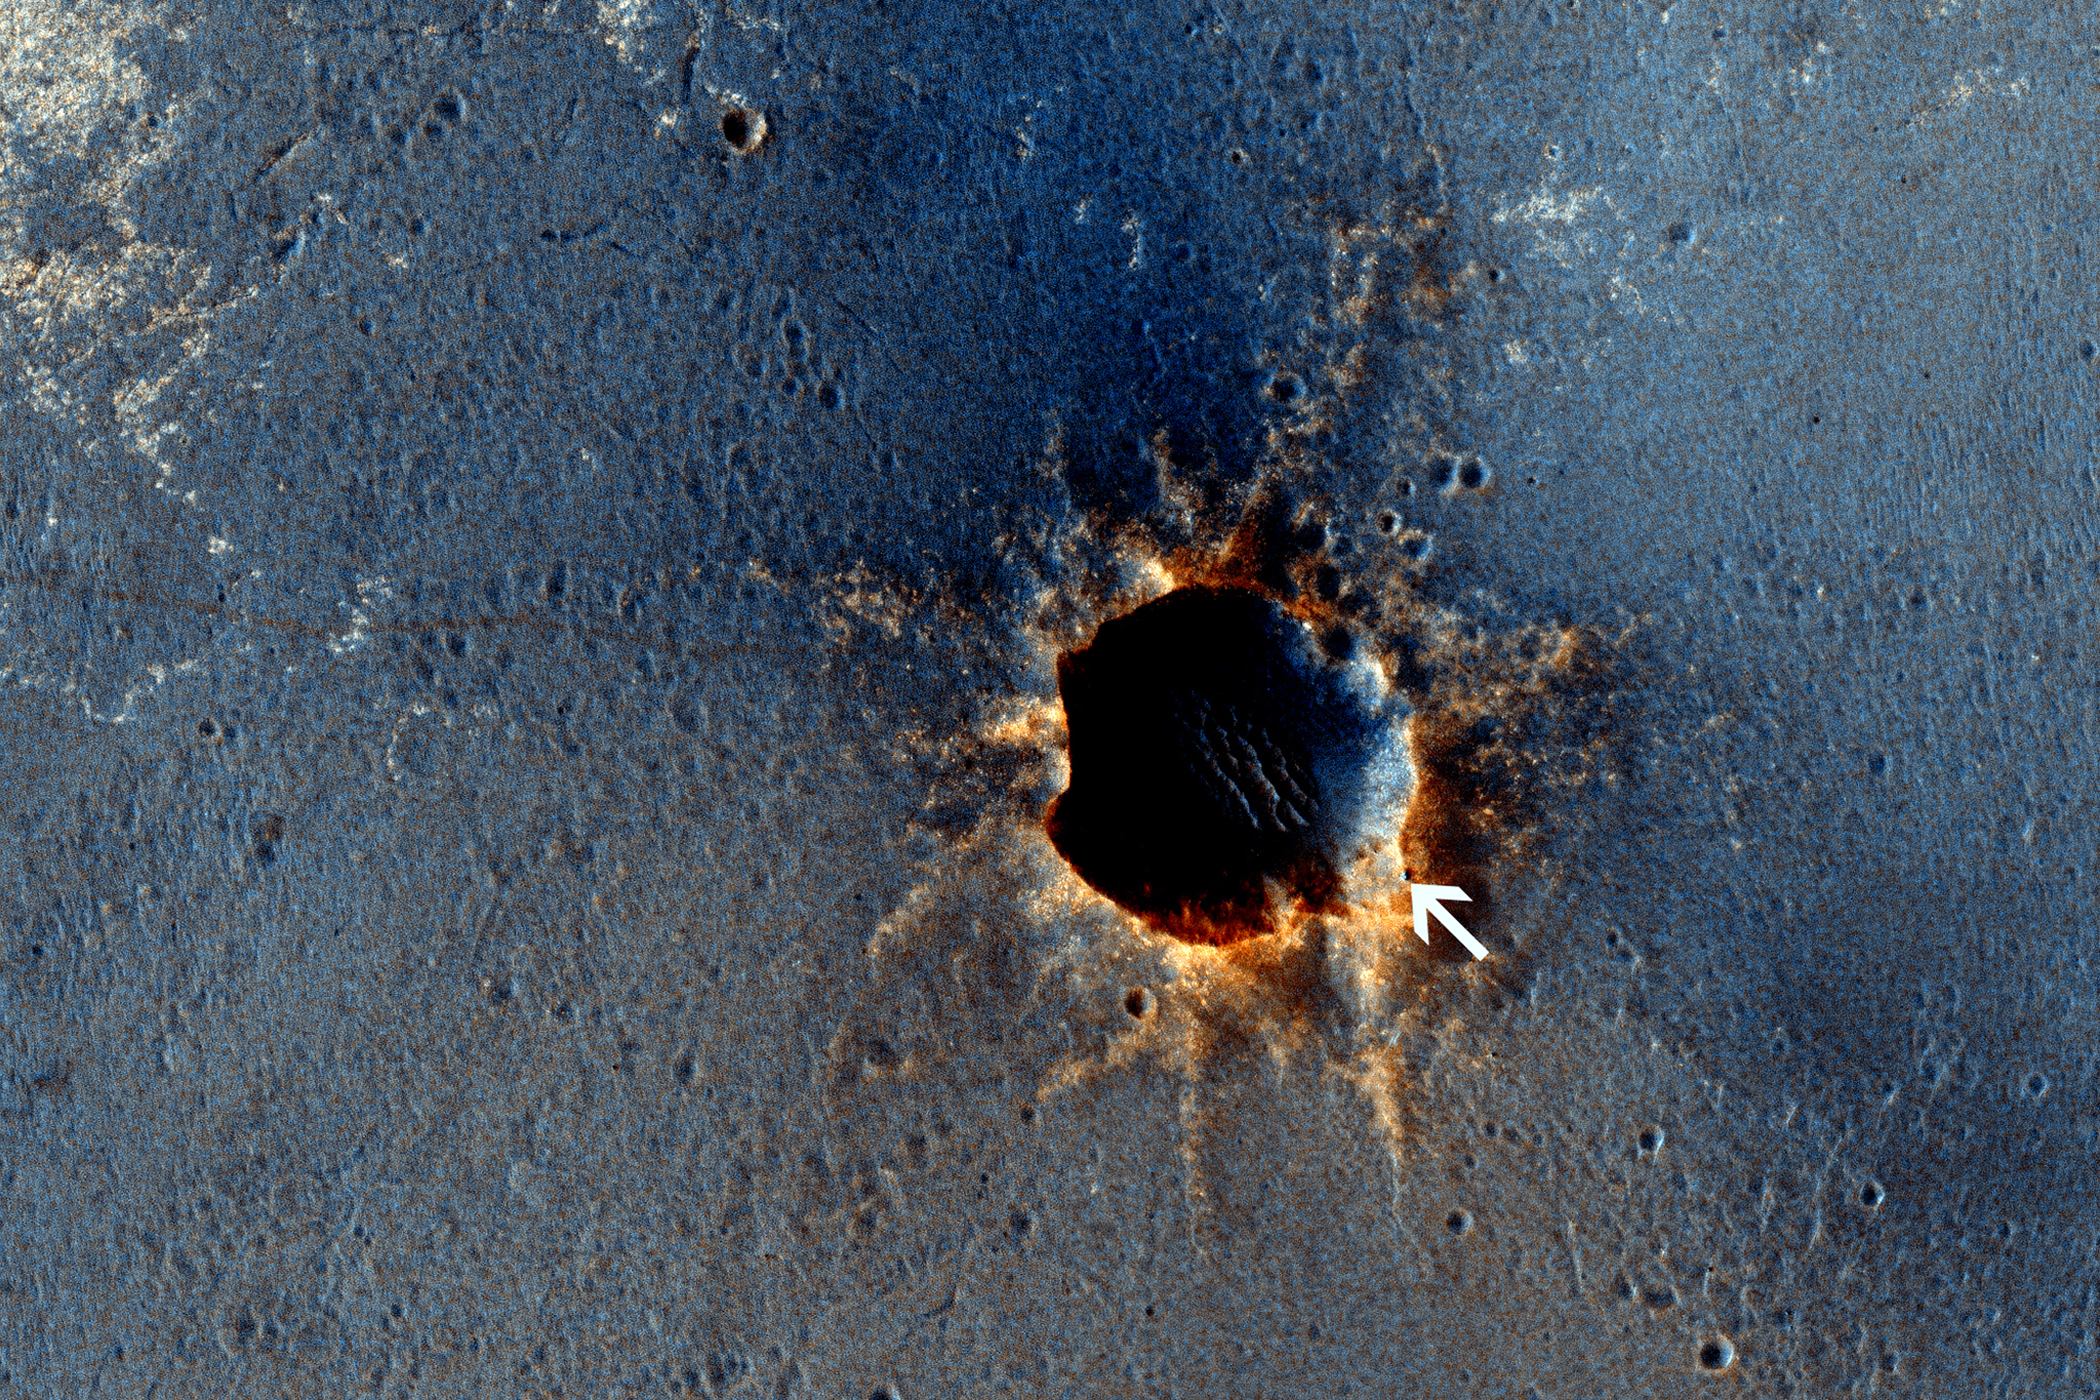 HiRISE acquired this color image of Santa Maria Crater, with the Opportunity rover perched on the southeast rim. Rover tracks are clearly visible to the east.Opportunity has been studying this relatively fresh 90 meter diameter crater to better understand how crater excavation occurred during the impact and how it has been modified by weathering and erosion since.